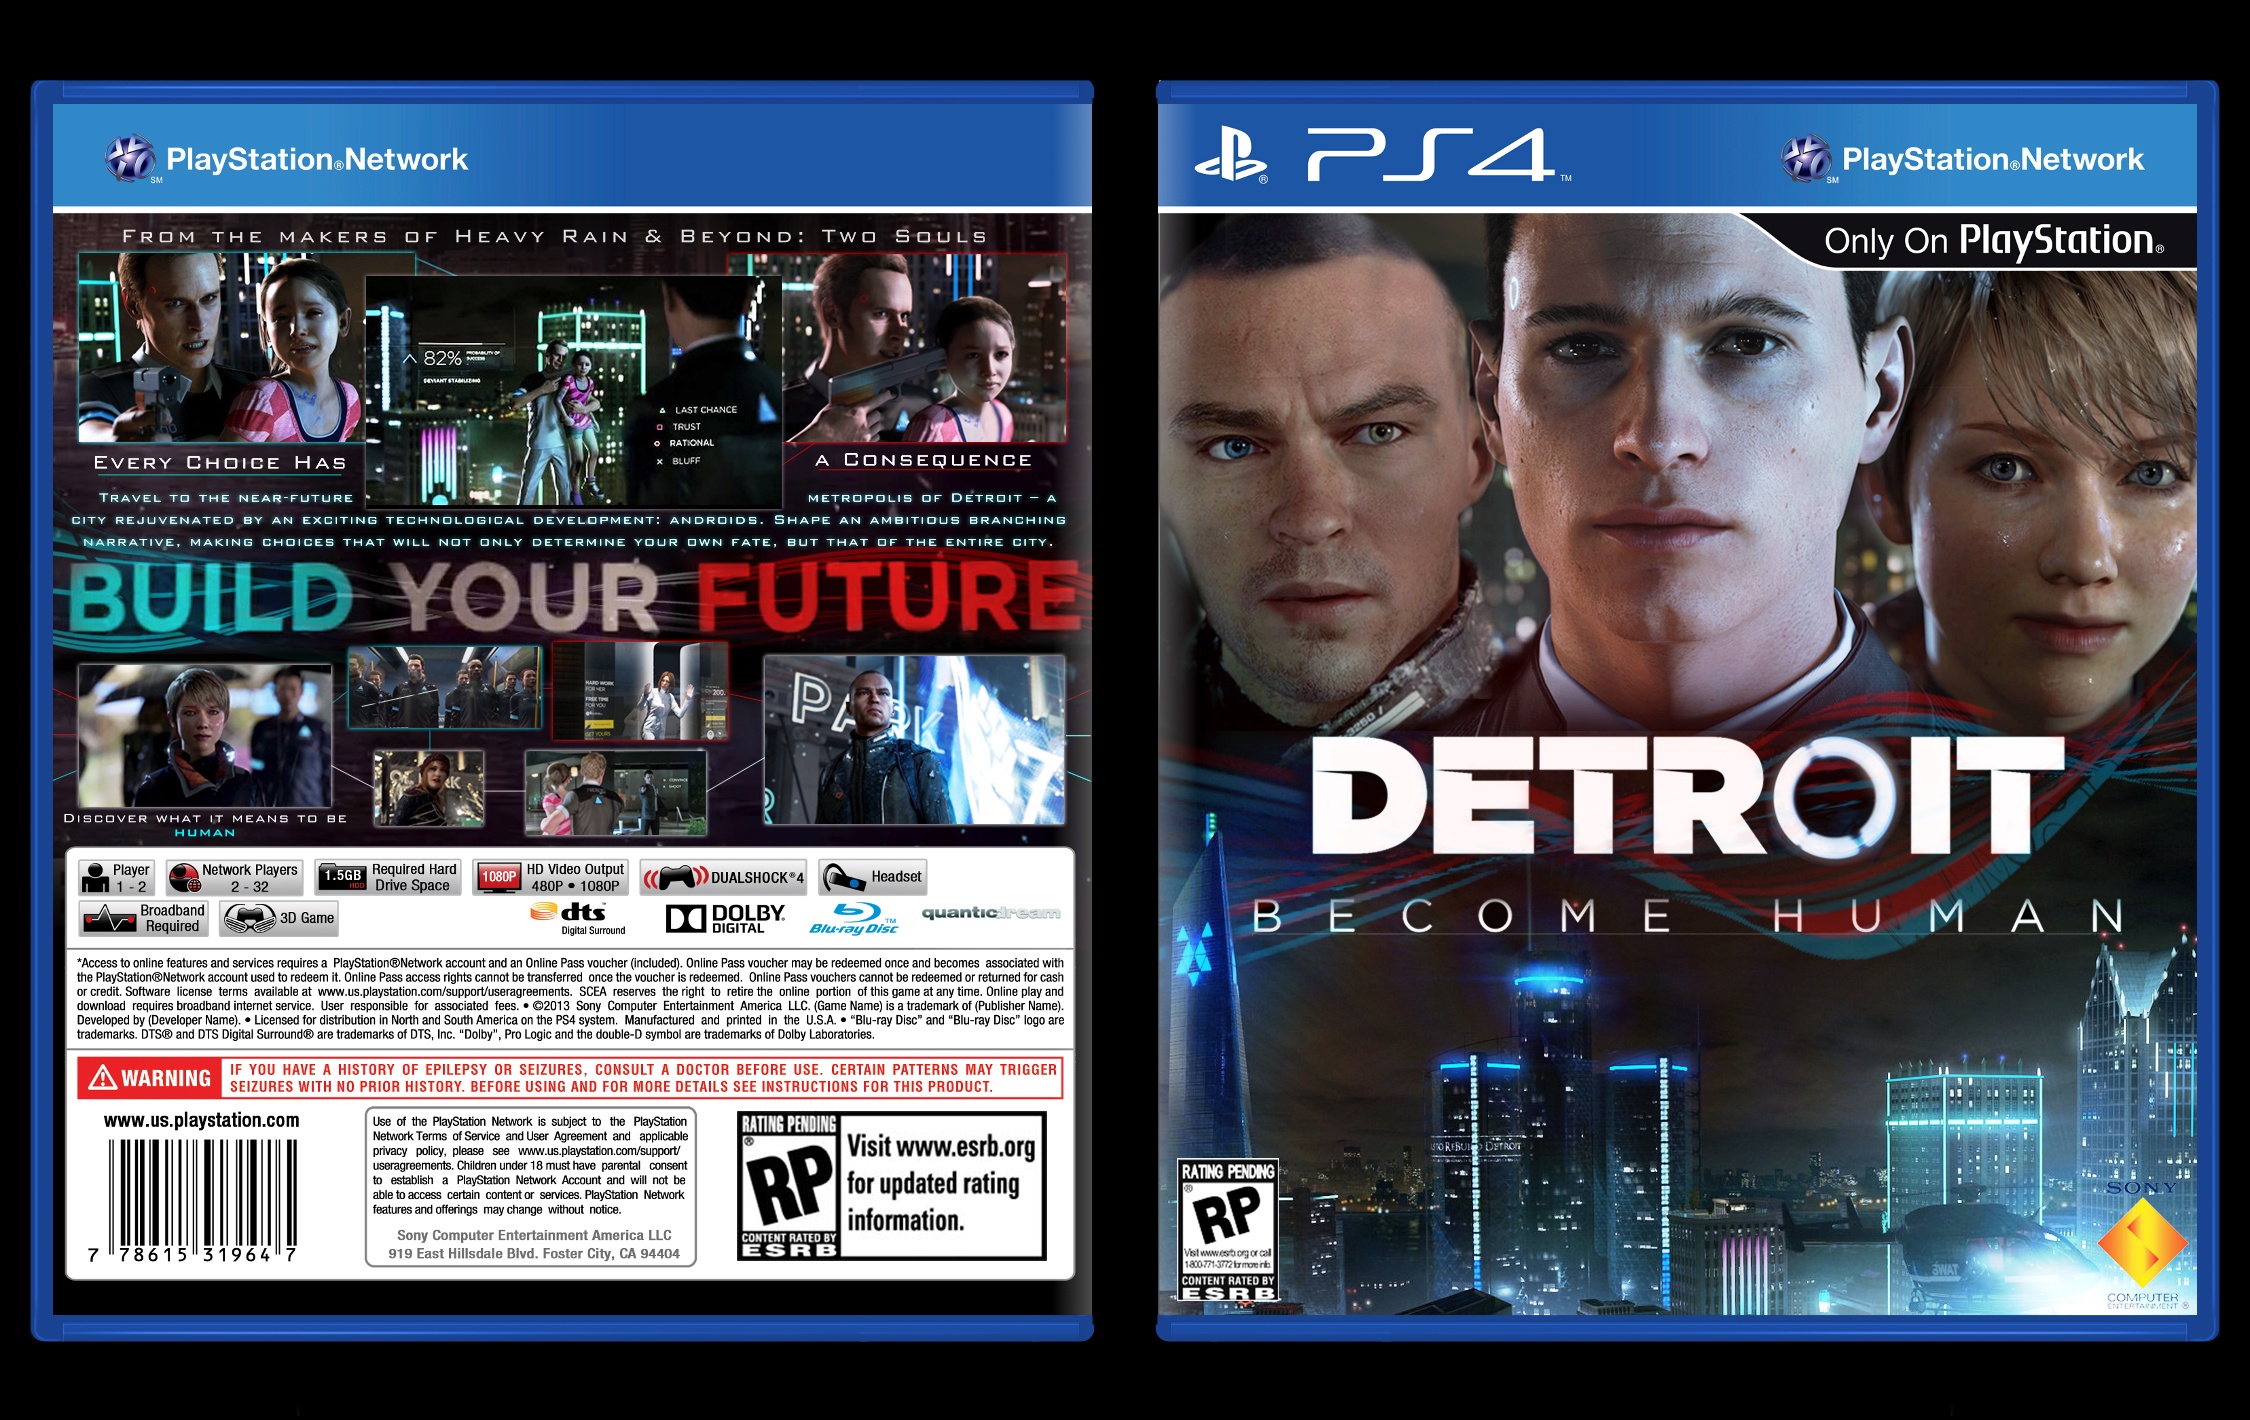 Viewing full size Detroit: Become Human box cover.